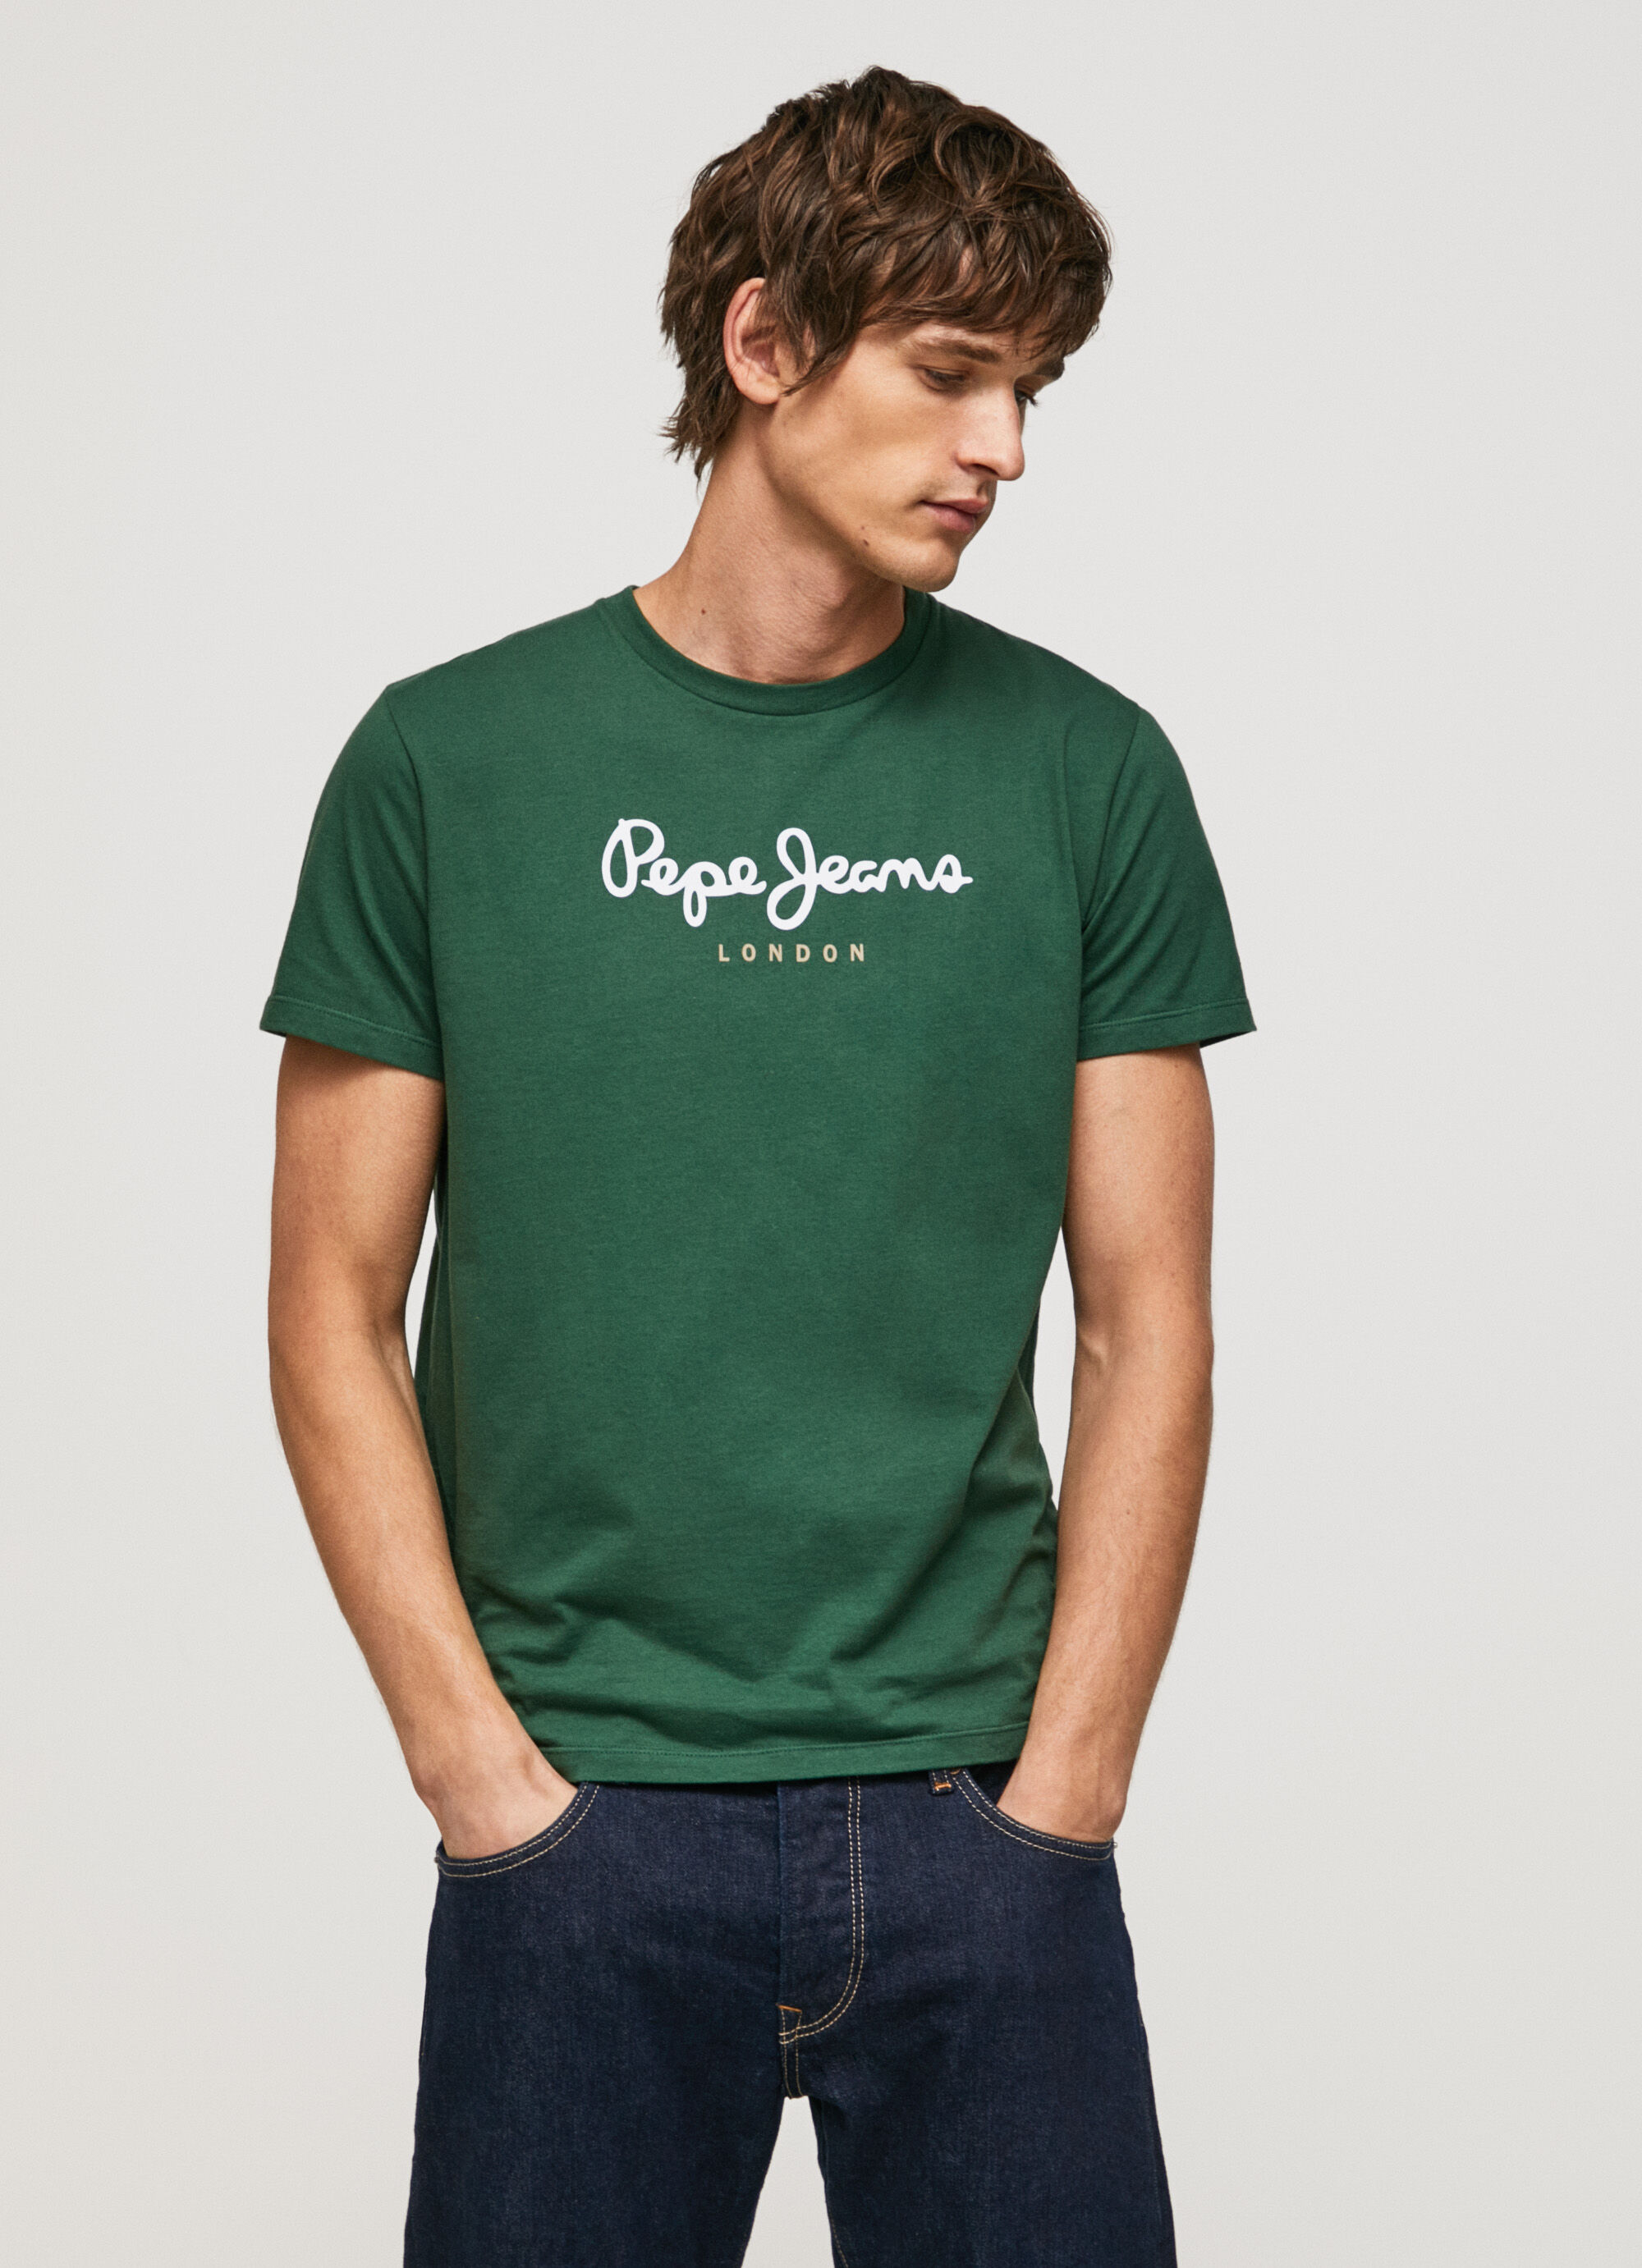 Tee-shirt PEPE JEANS 2 Homme Vêtements Pepe Jeans Homme Tee-shirts & Polos Pepe Jeans Homme Tee-shirts Pepe Jeans Homme M kaki Tee-shirts Pepe Jeans Homme 